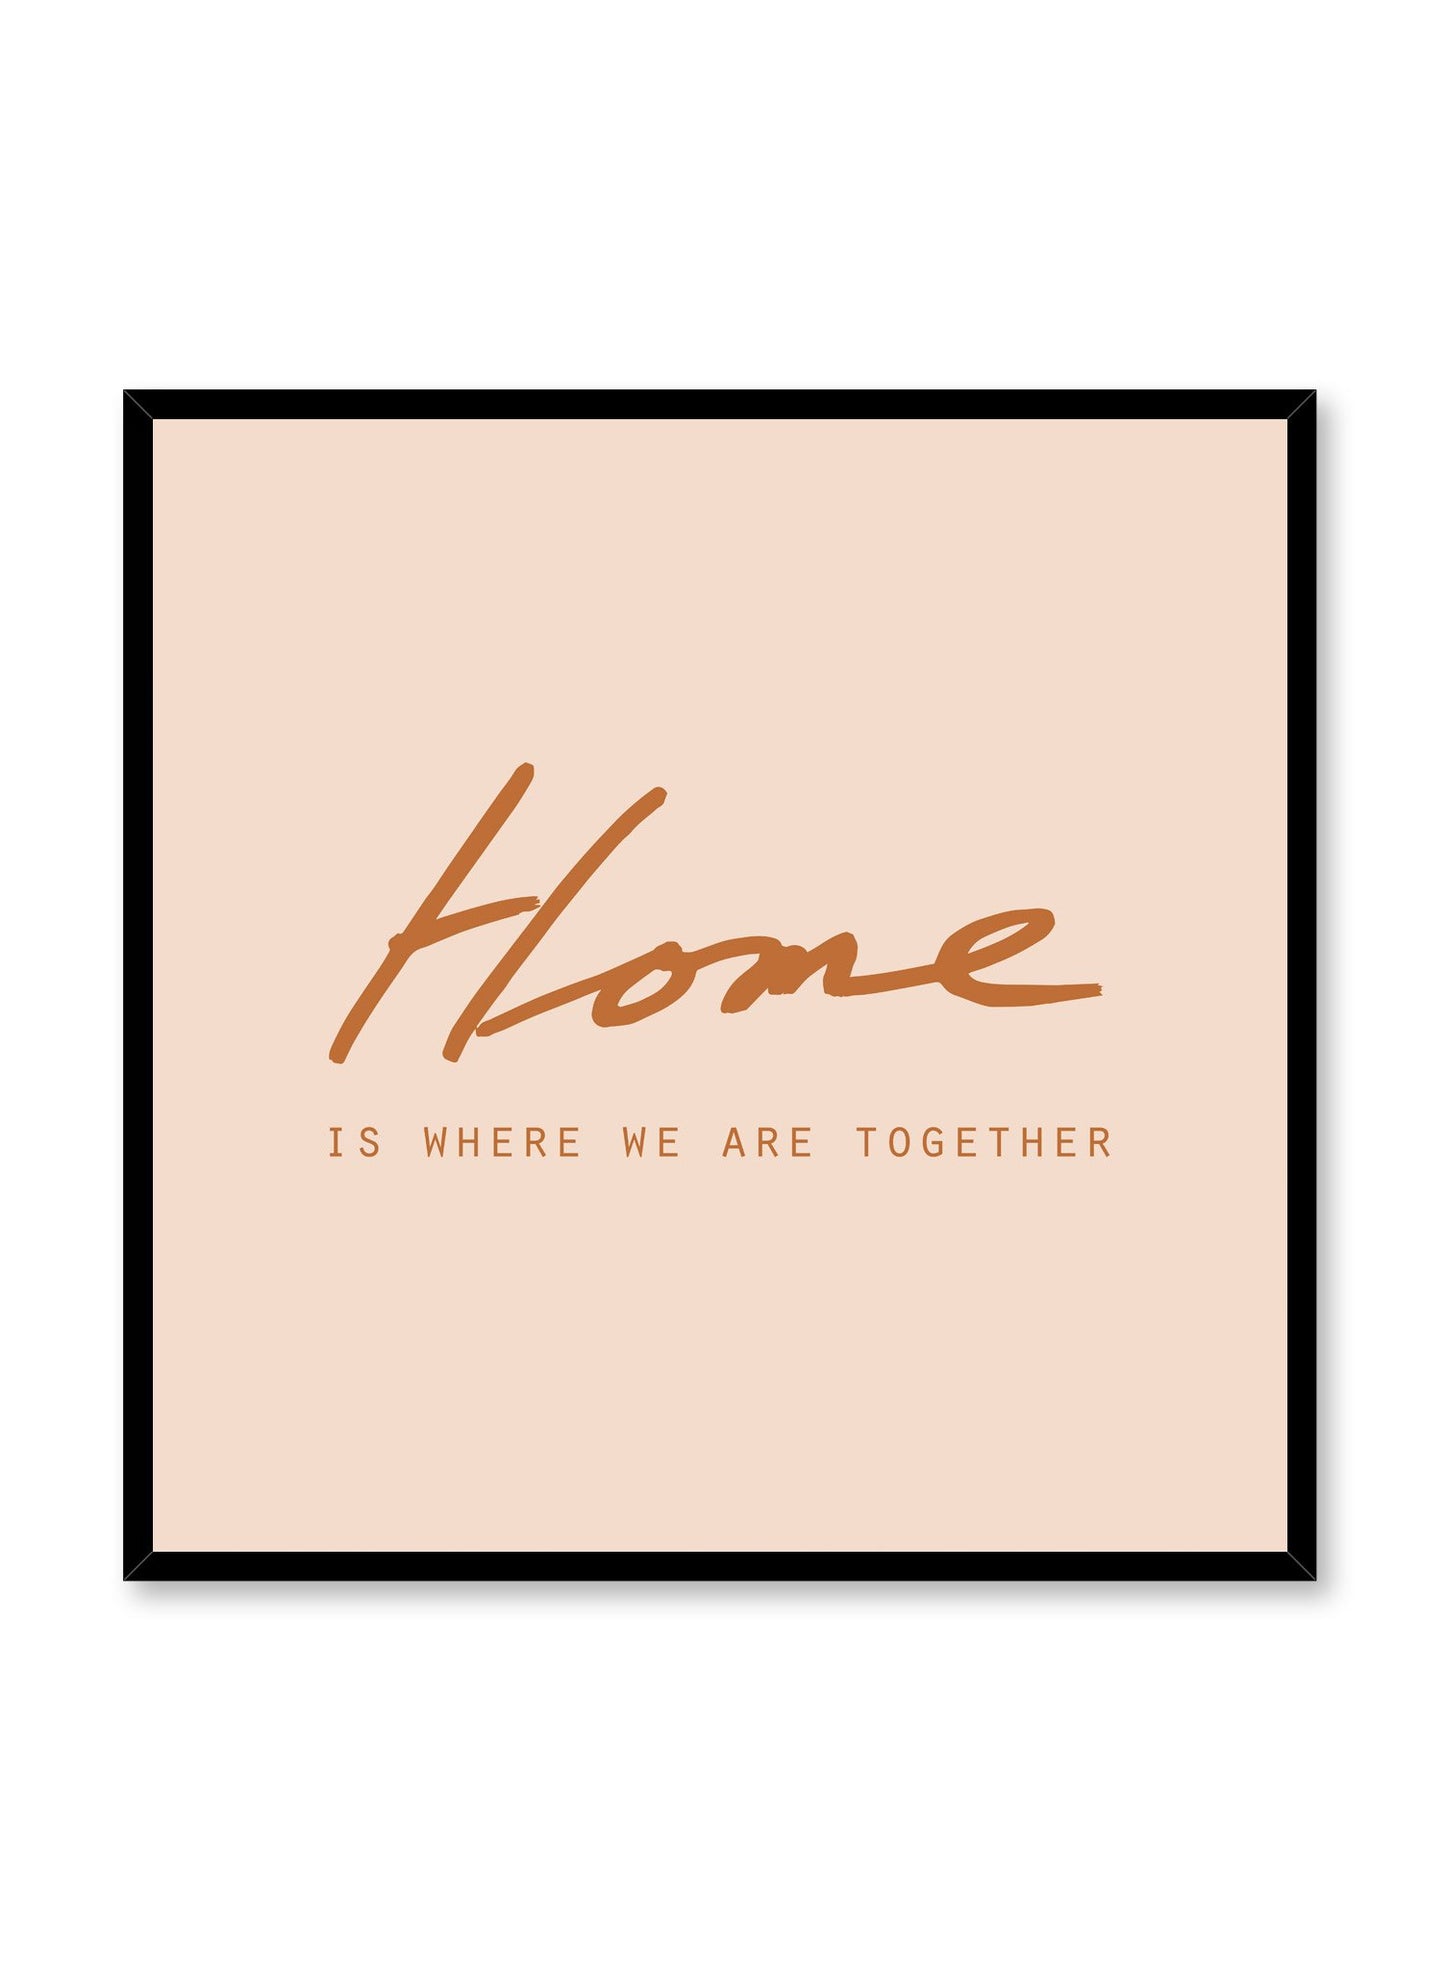 Scandinavian square poster with orange graphic typography design of home is where we are together by Opposite Wall